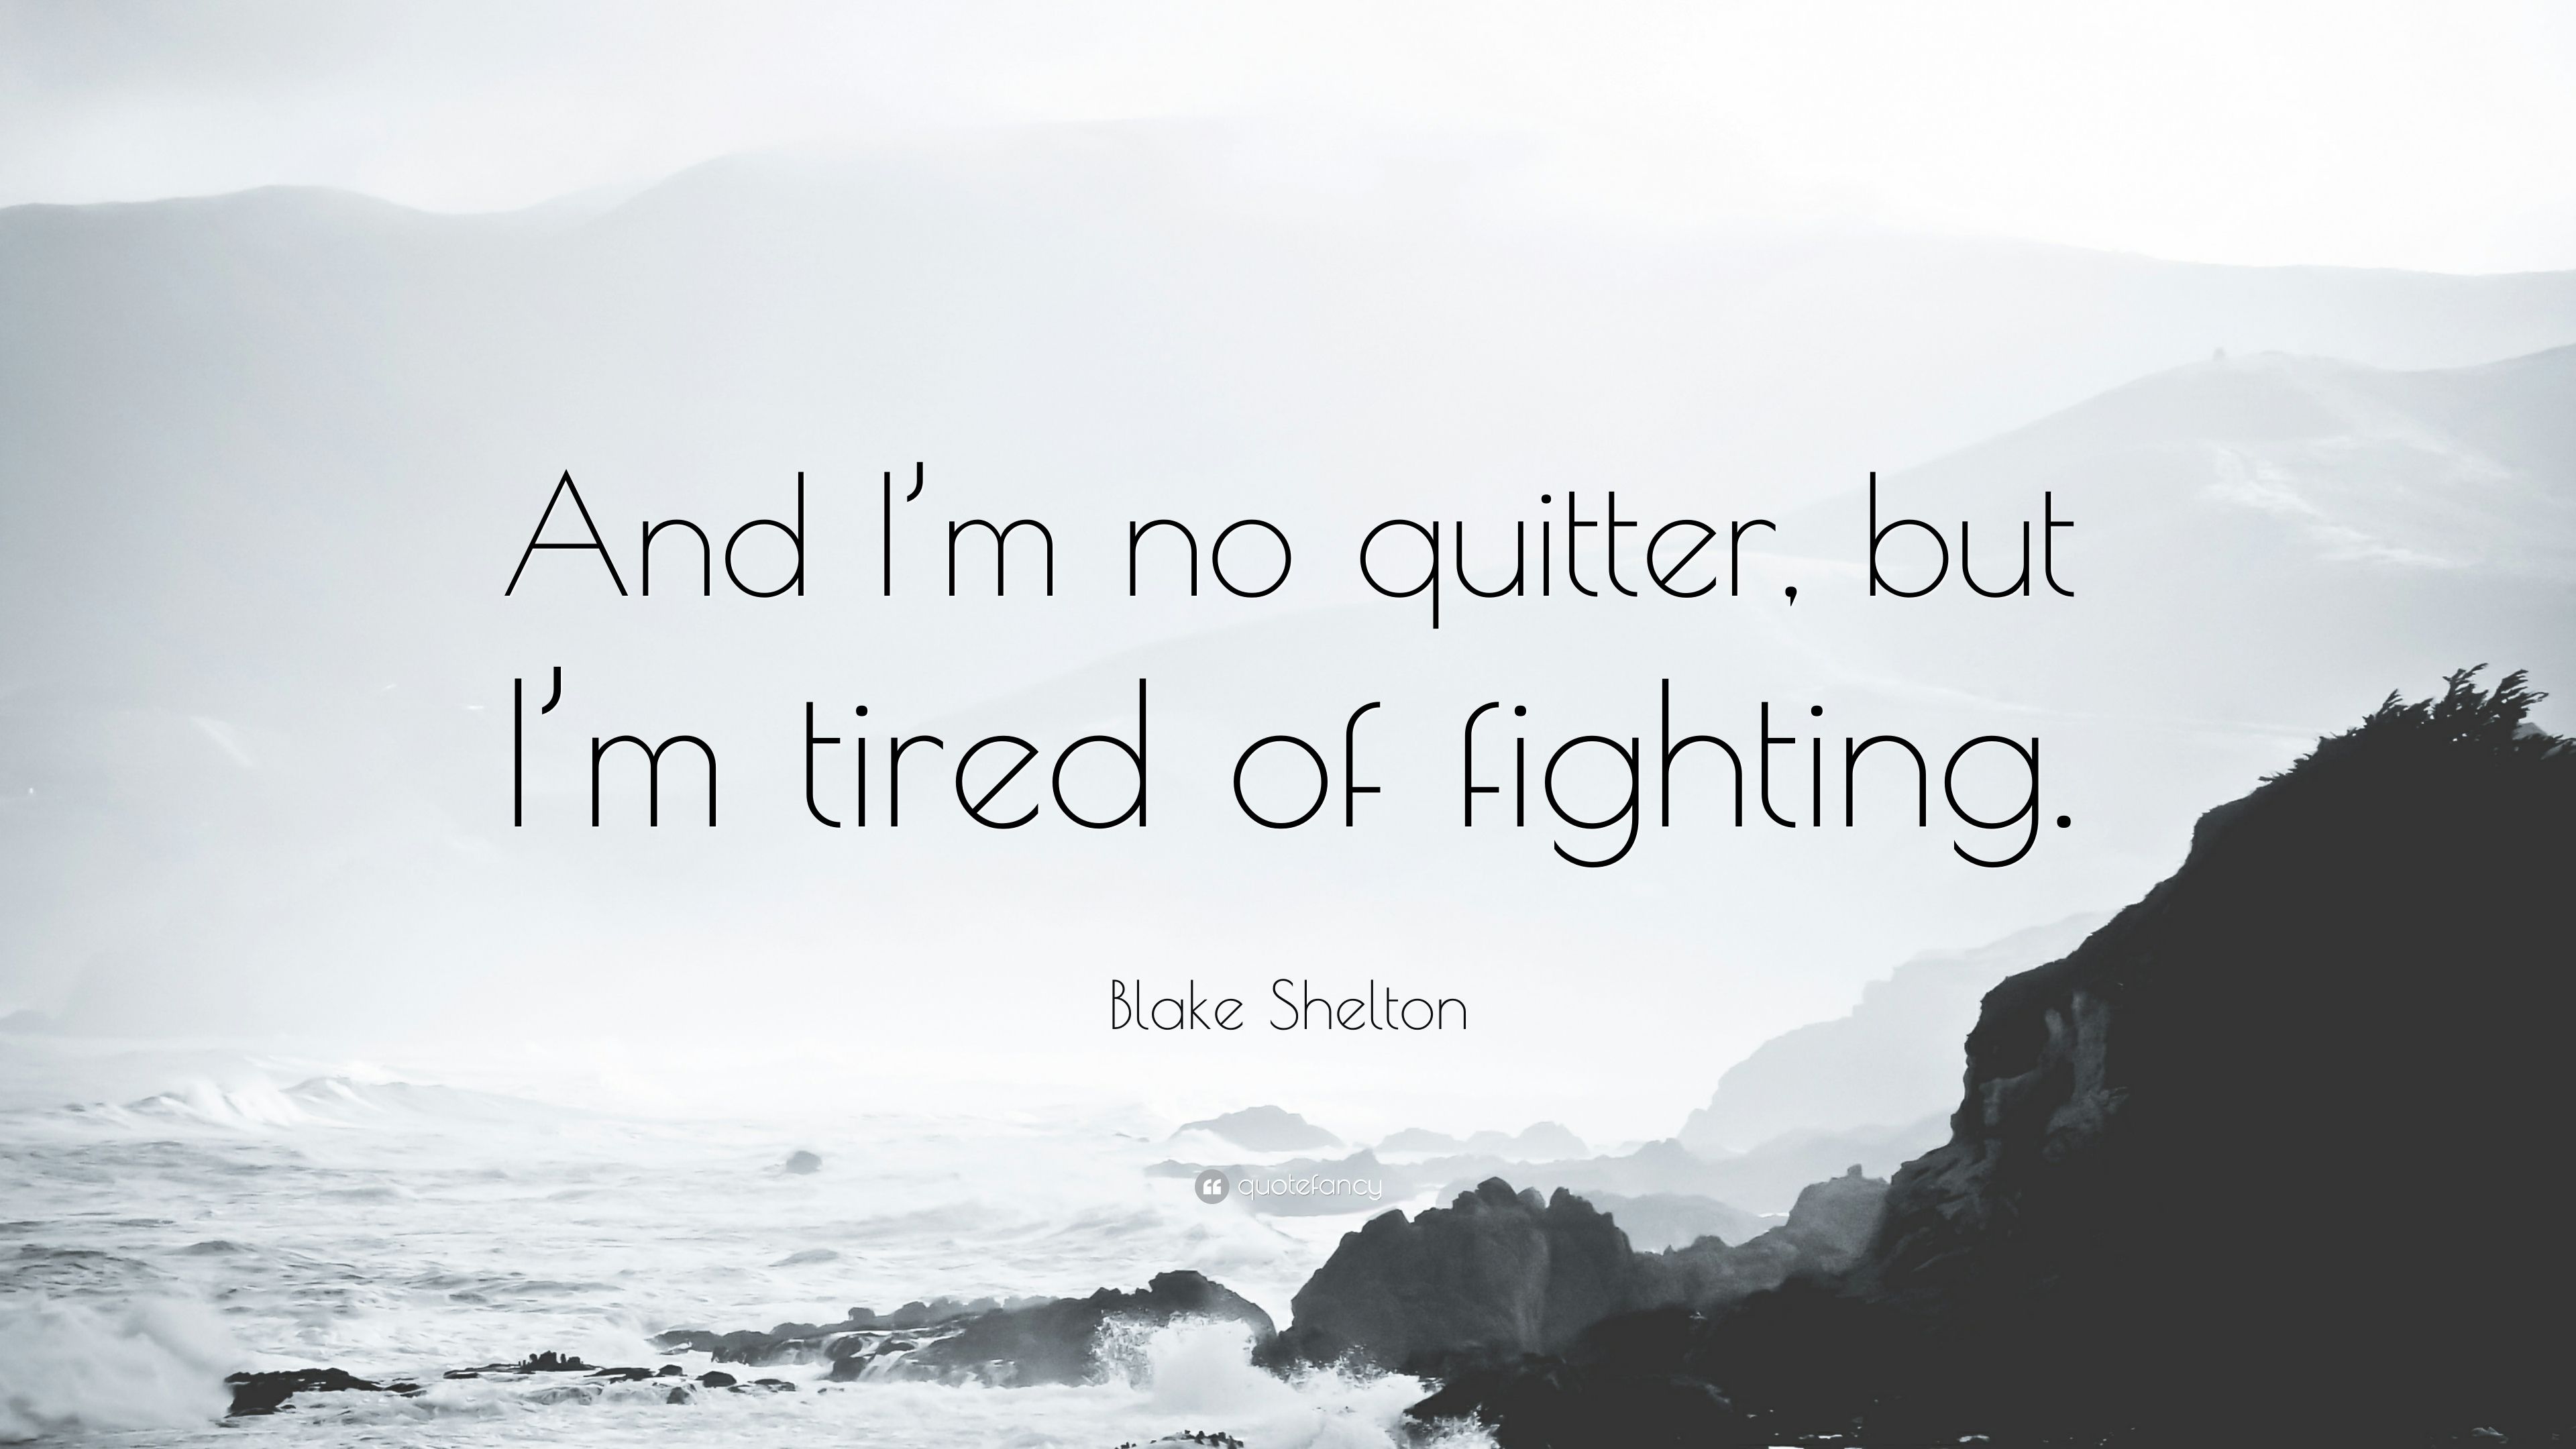 Blake Shelton Quote: “And I'm no quitter, but I'm tired